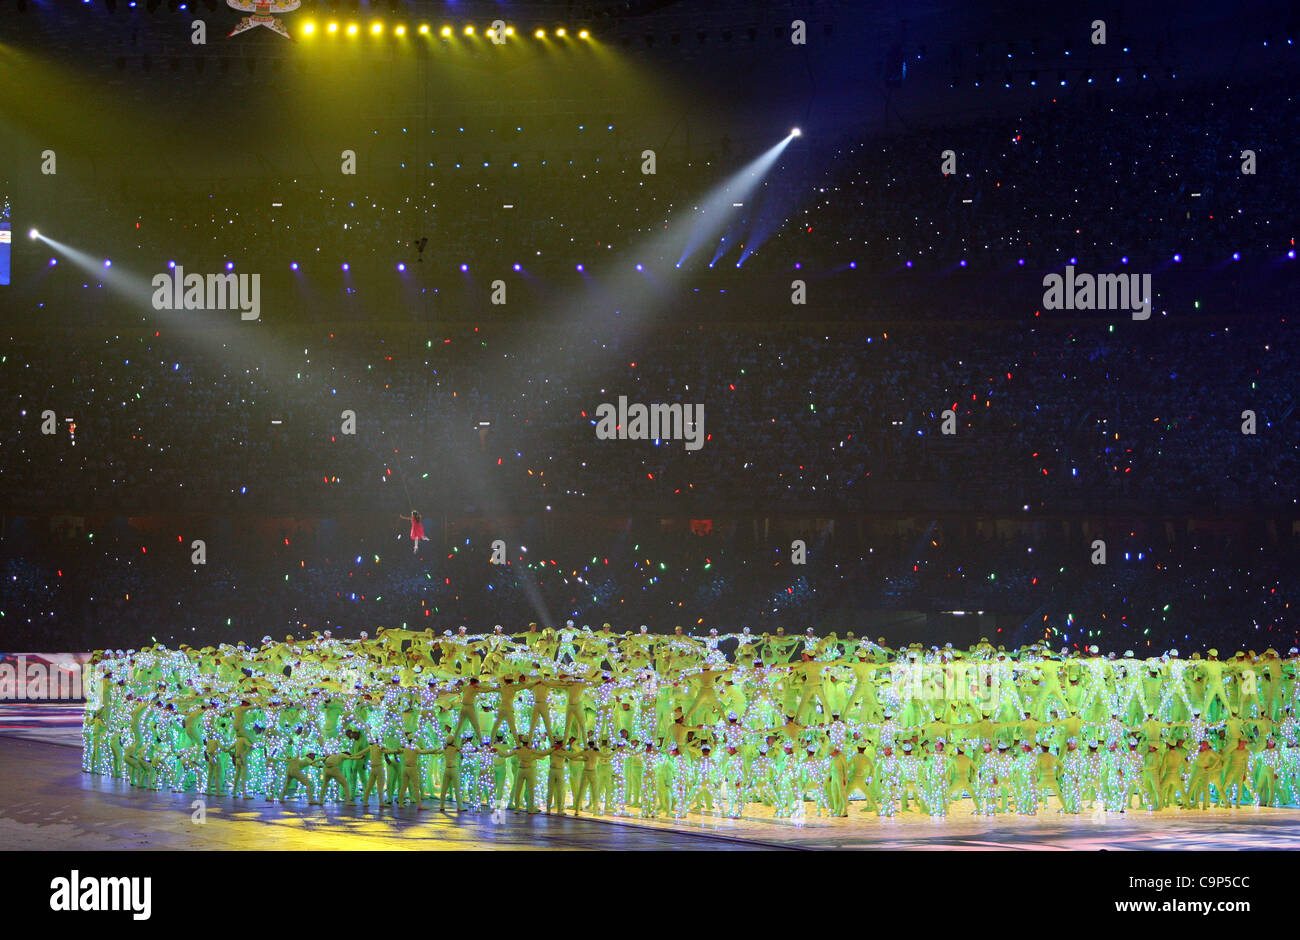 AUGUST 8, 2008 - Opening Ceremony : General view. The opening ceremony for the 2008 Beijing Summer Olympics at the National Stadium on August 8, 2008 in Beijing, China. (Photo by Koji Aoki/AFLO SPORT) [0008] Stock Photo